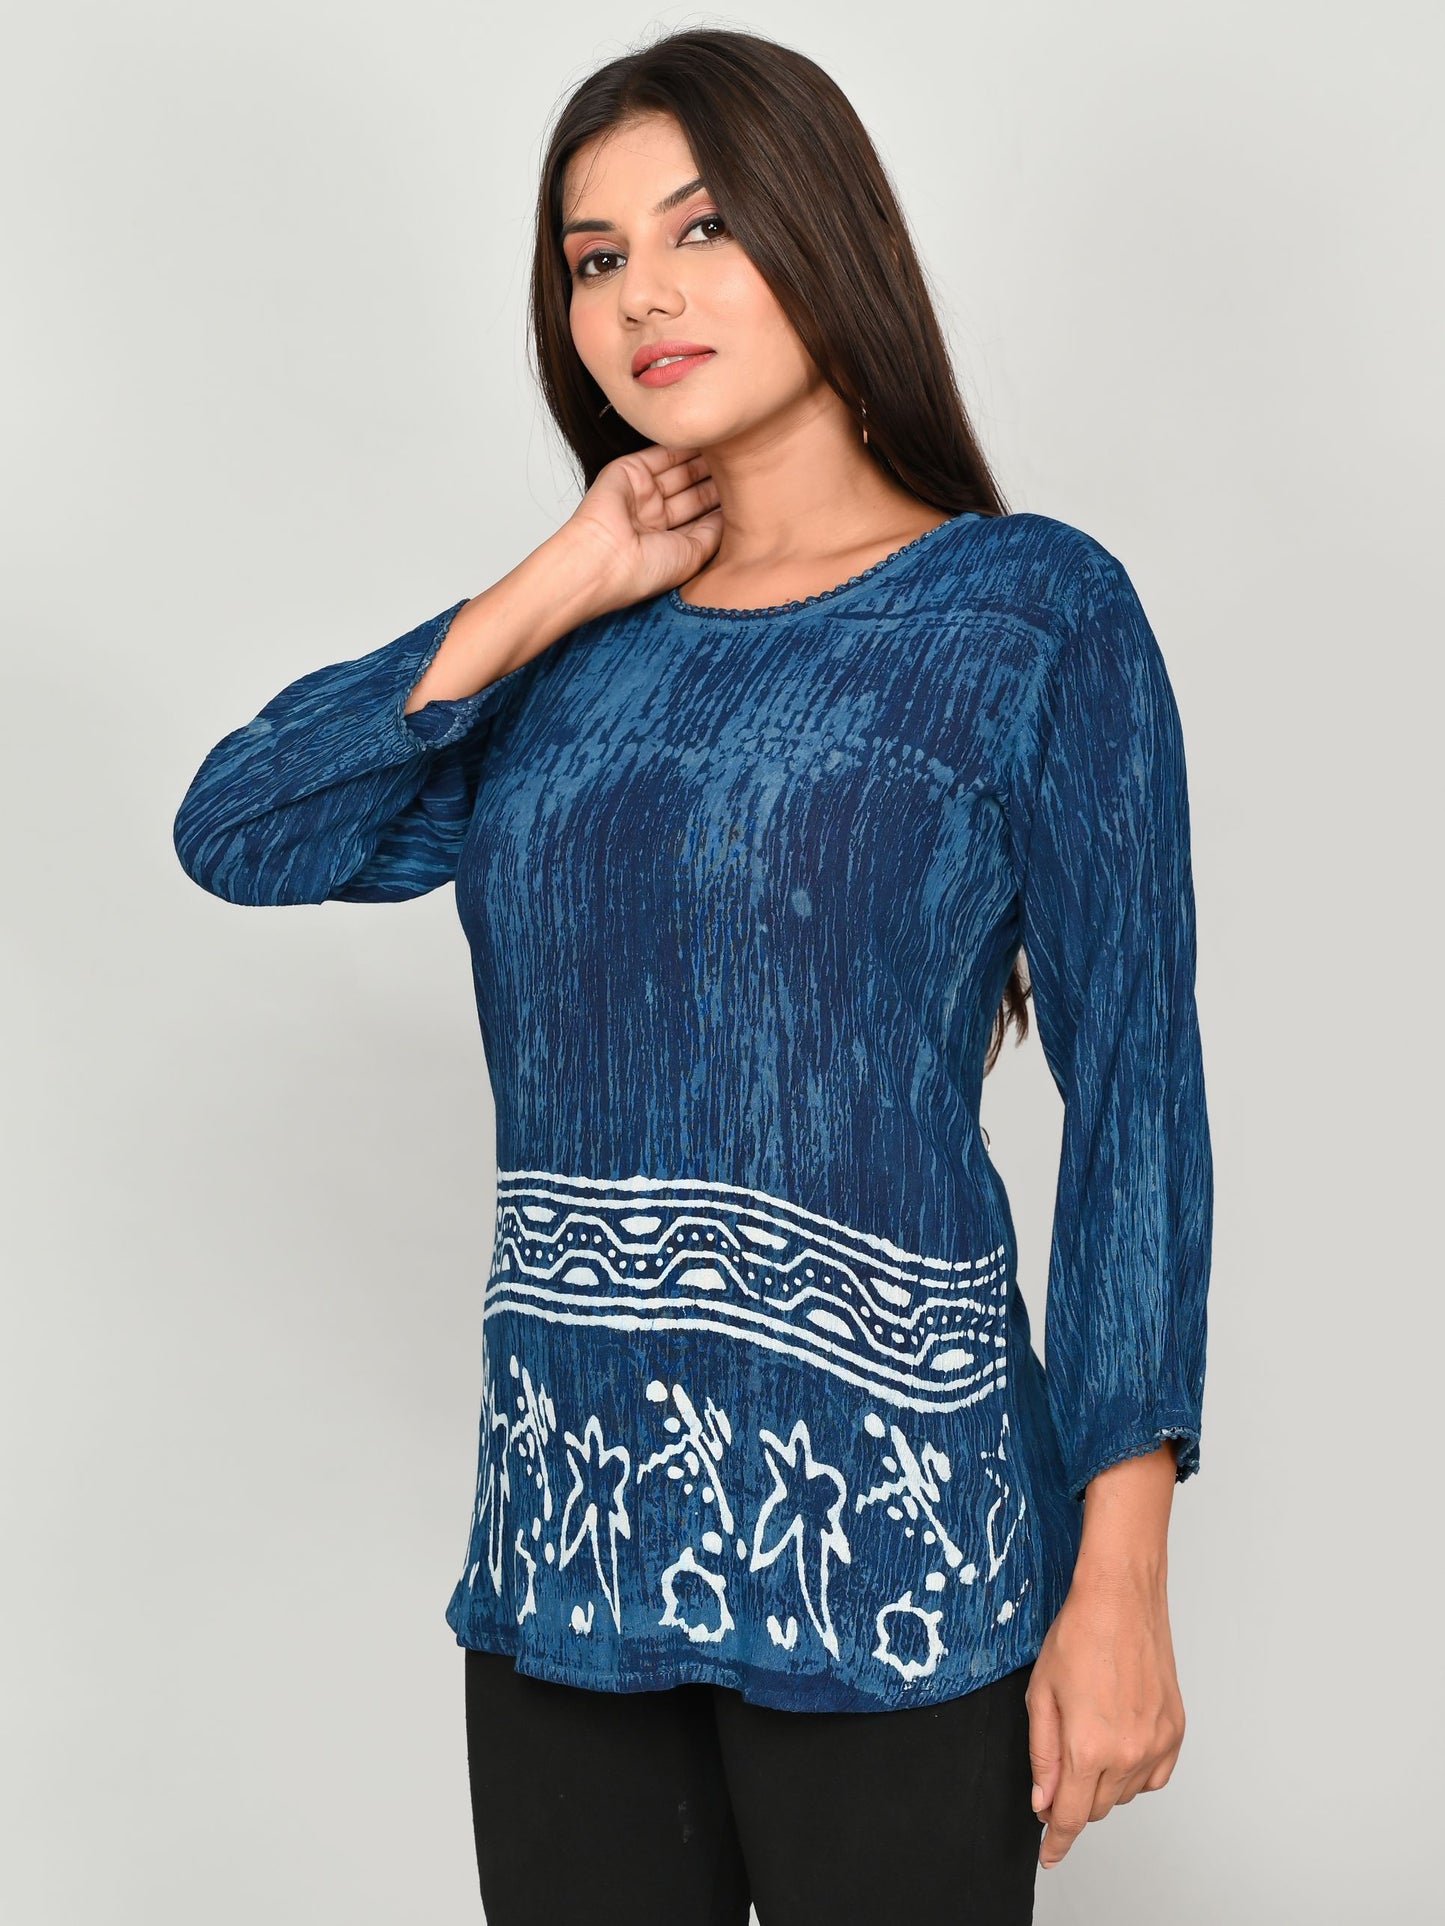 Elevate your casual style with our Navy Blue Silk Crepe Printed Casual Top for women/girls. Made with premium quality silk crepe, this top features a stylish print that adds a touch of elegance to any outfit. Soft and comfortable, it's perfect for everyday wear.